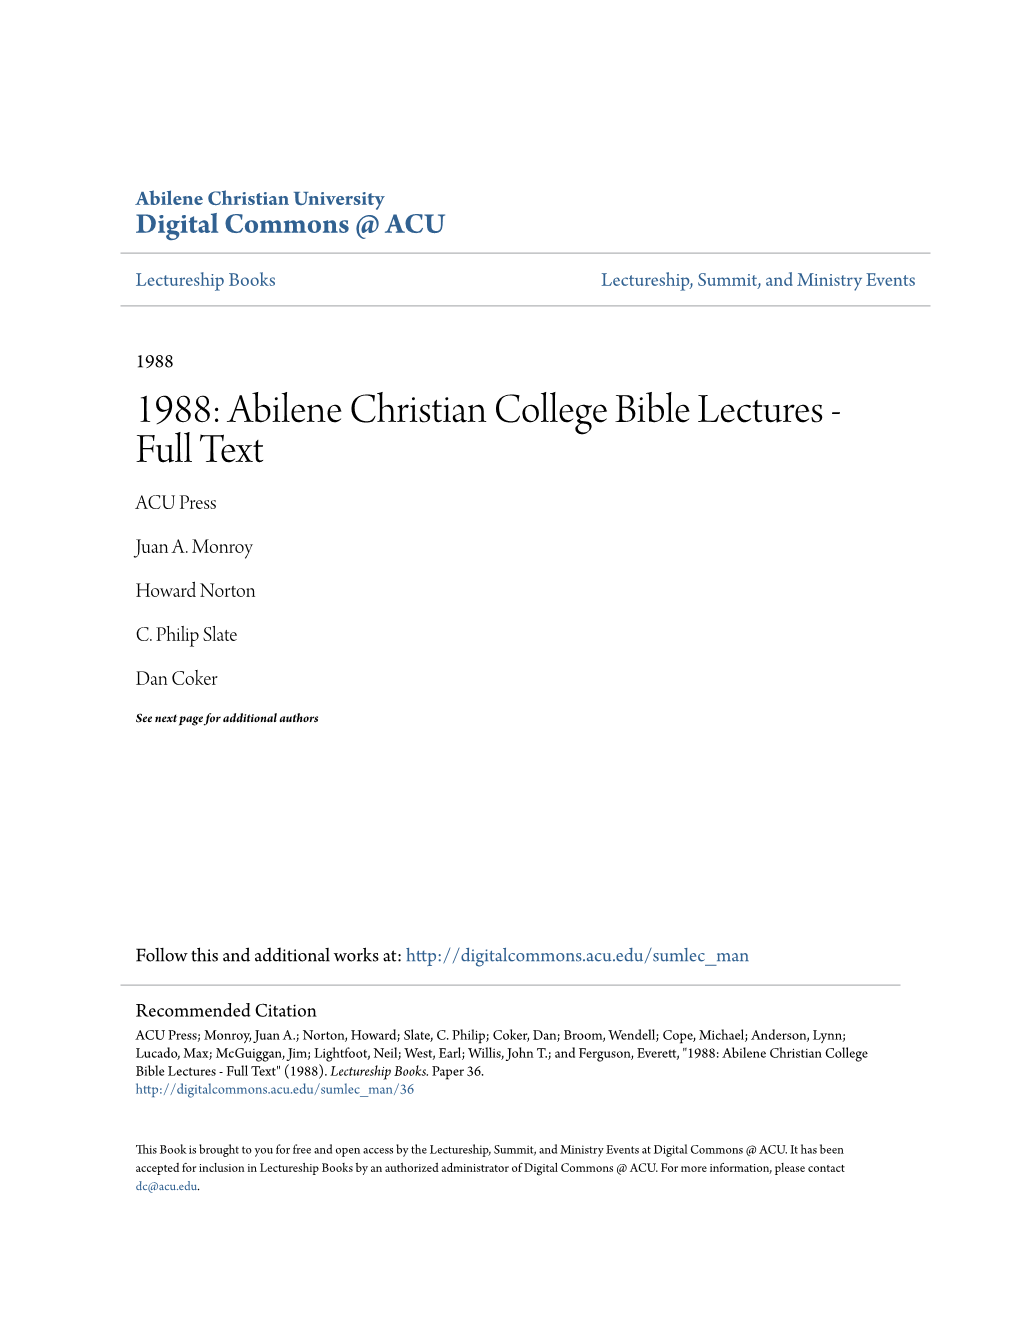 1988: Abilene Christian College Bible Lectures - Full Text ACU Press